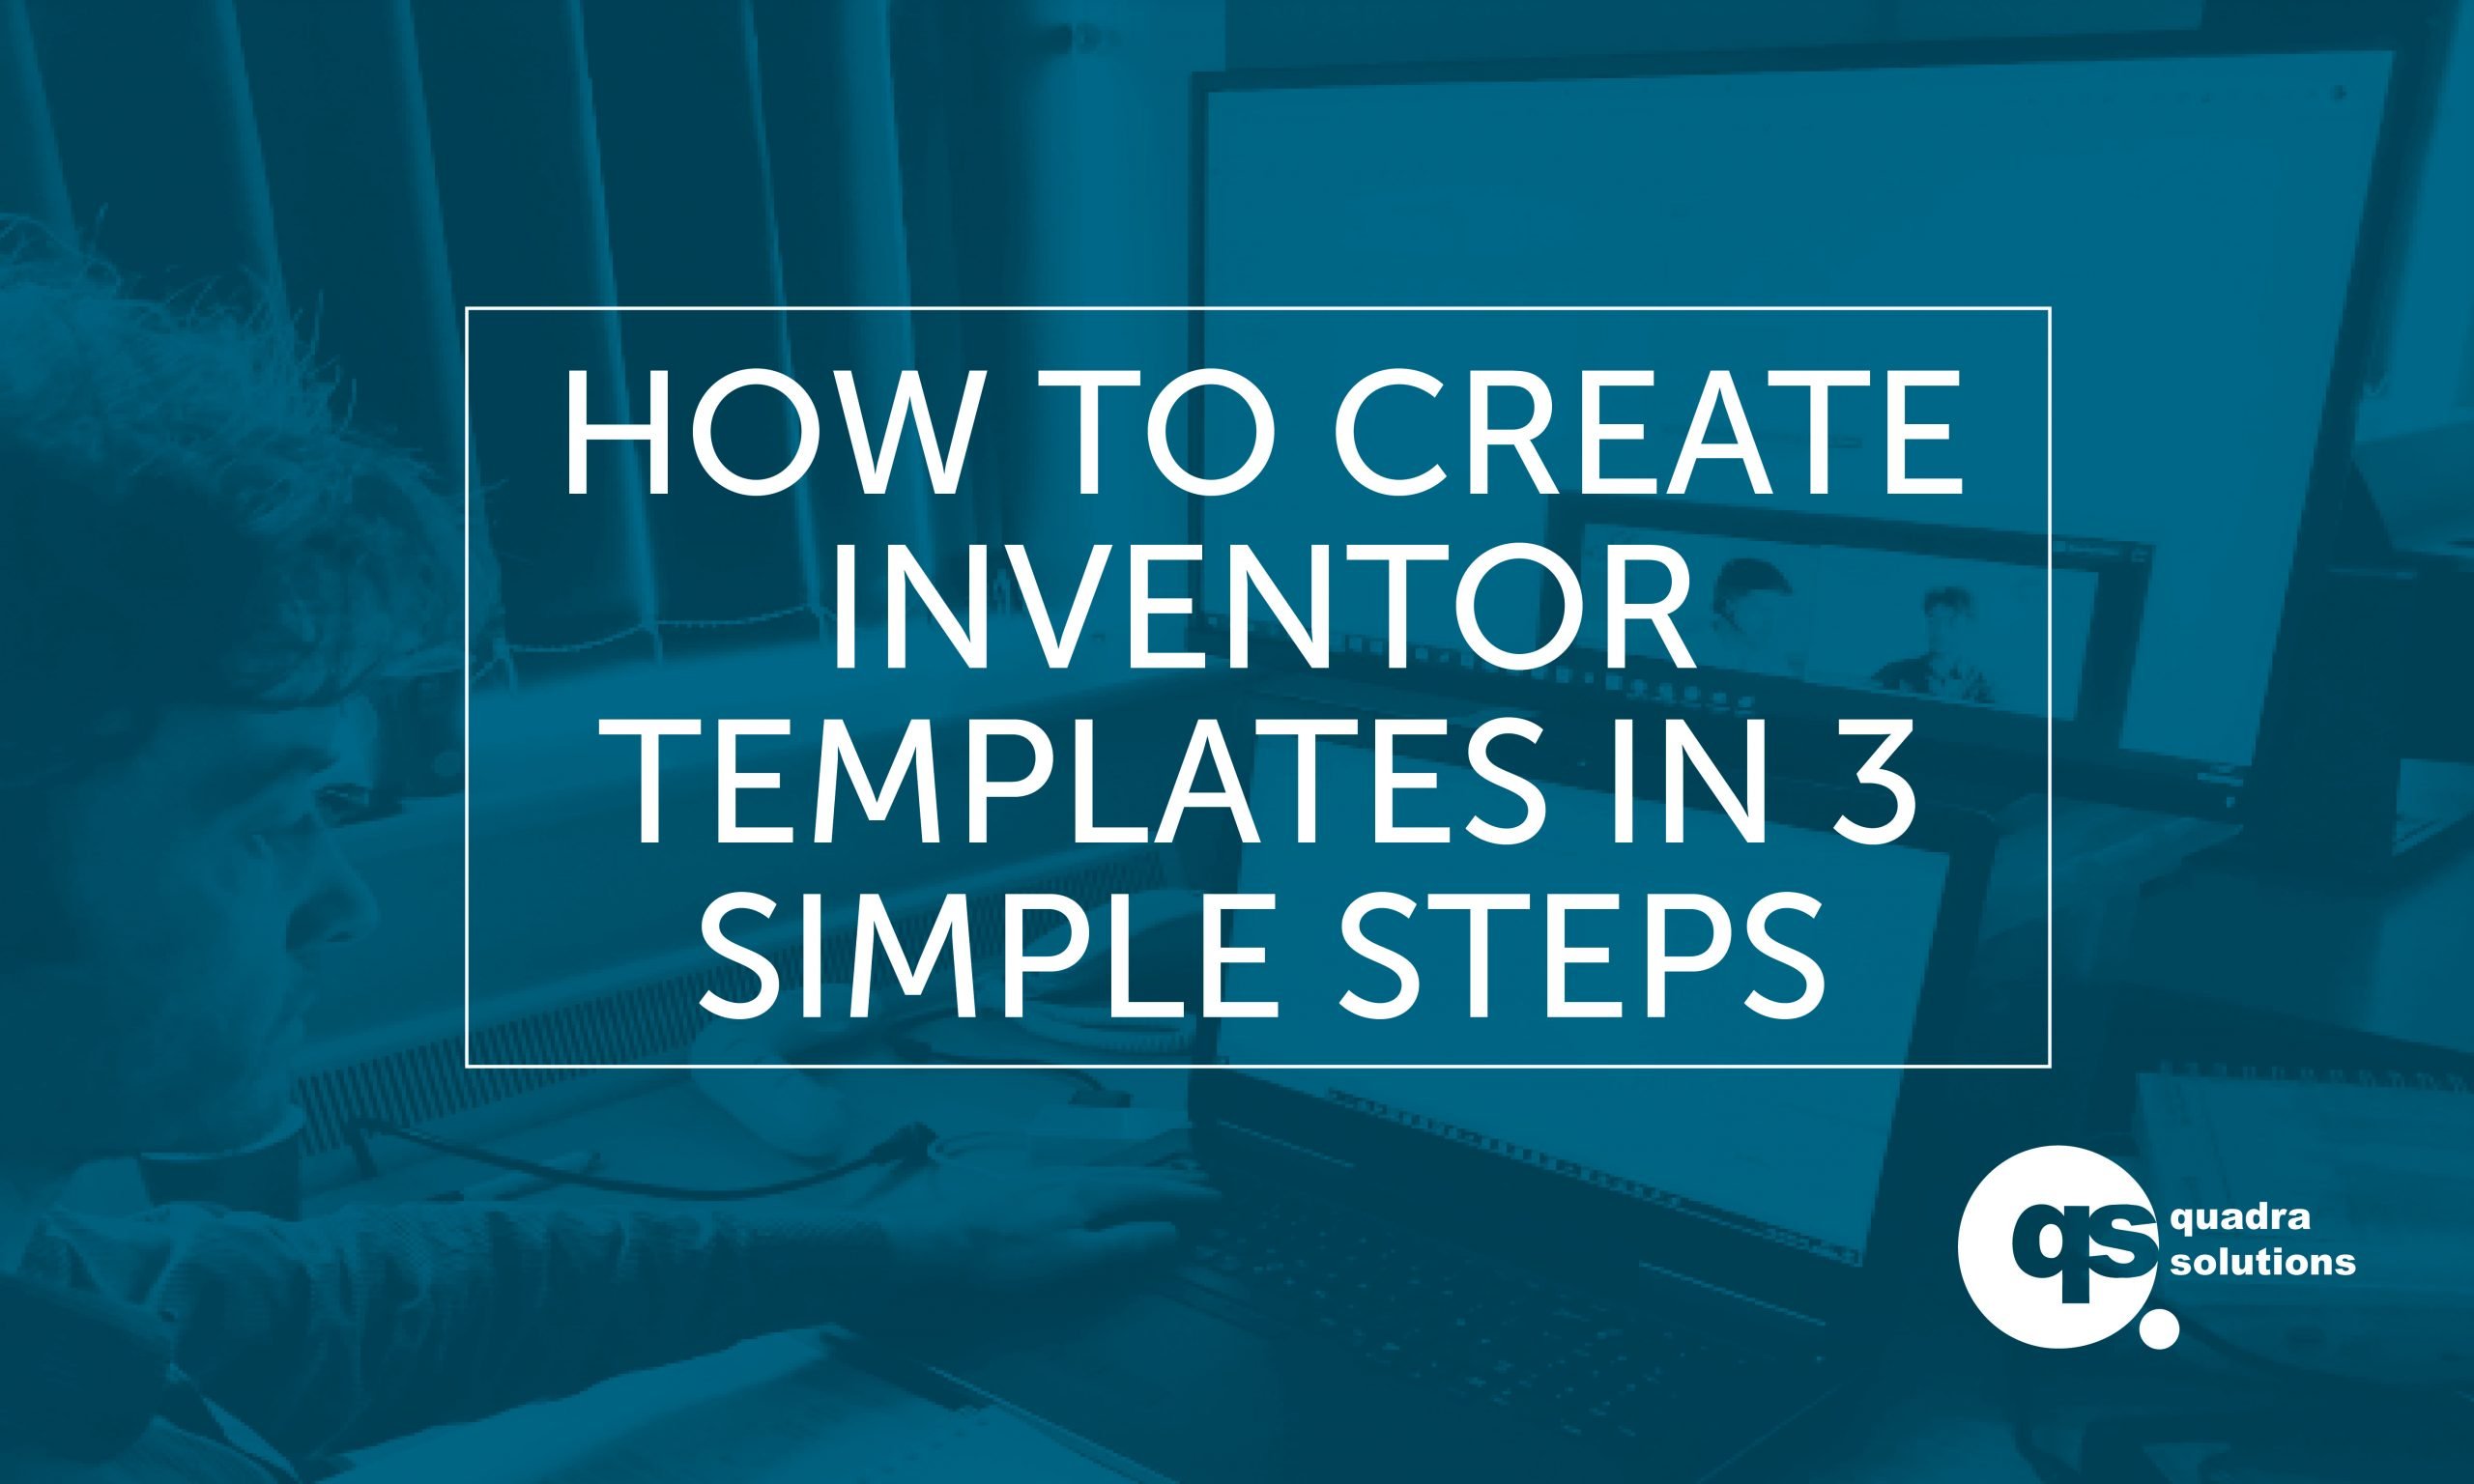 How to Create Inventor Templates in 3 Simple Steps